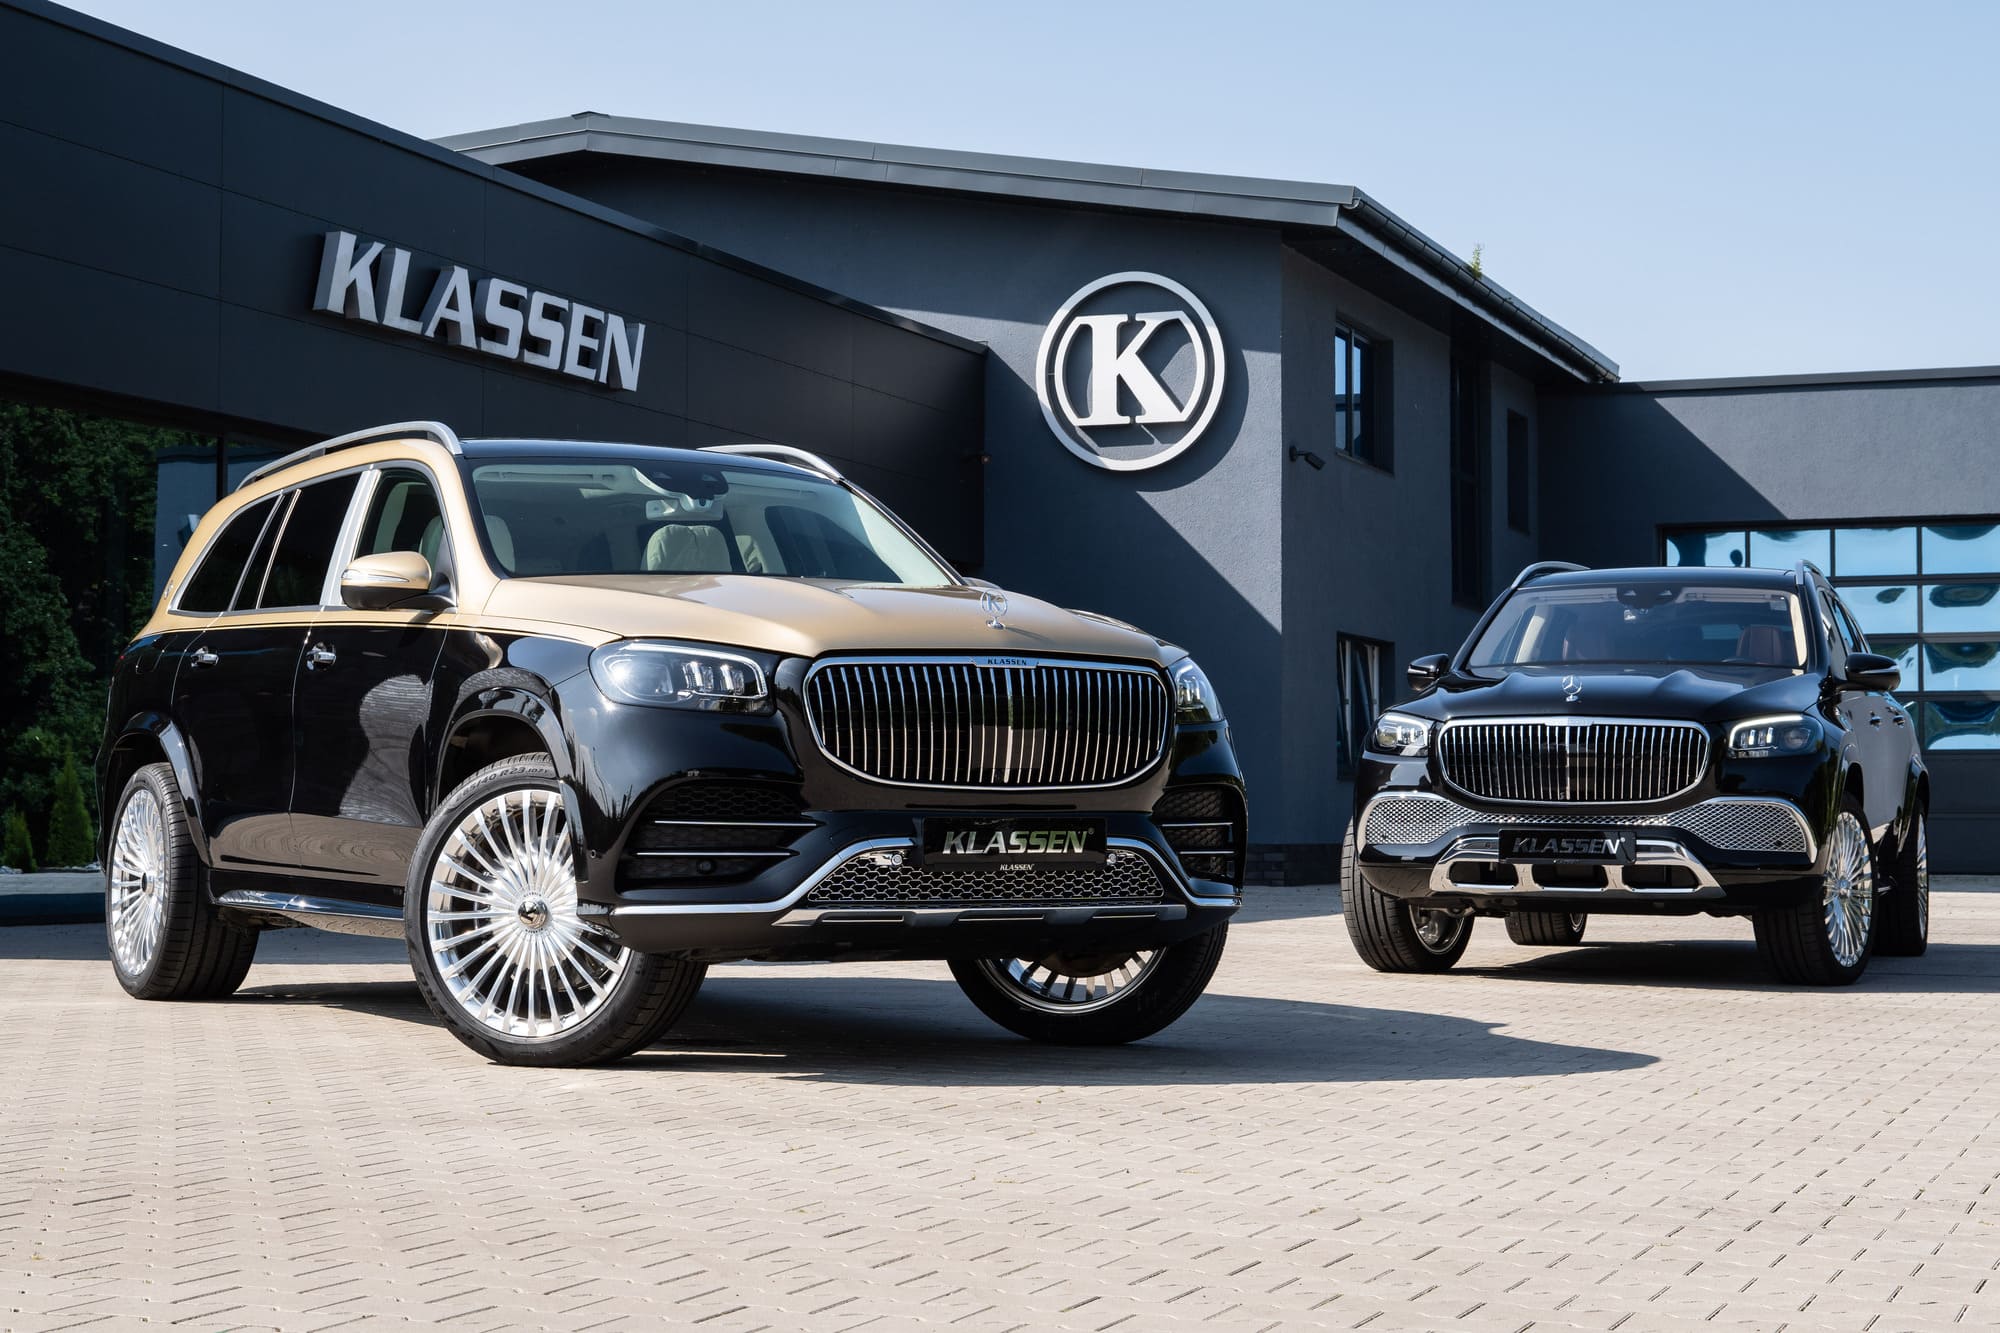 KLASSEN Luxury VIP Cars and Vans - Armored and Stretched Cars